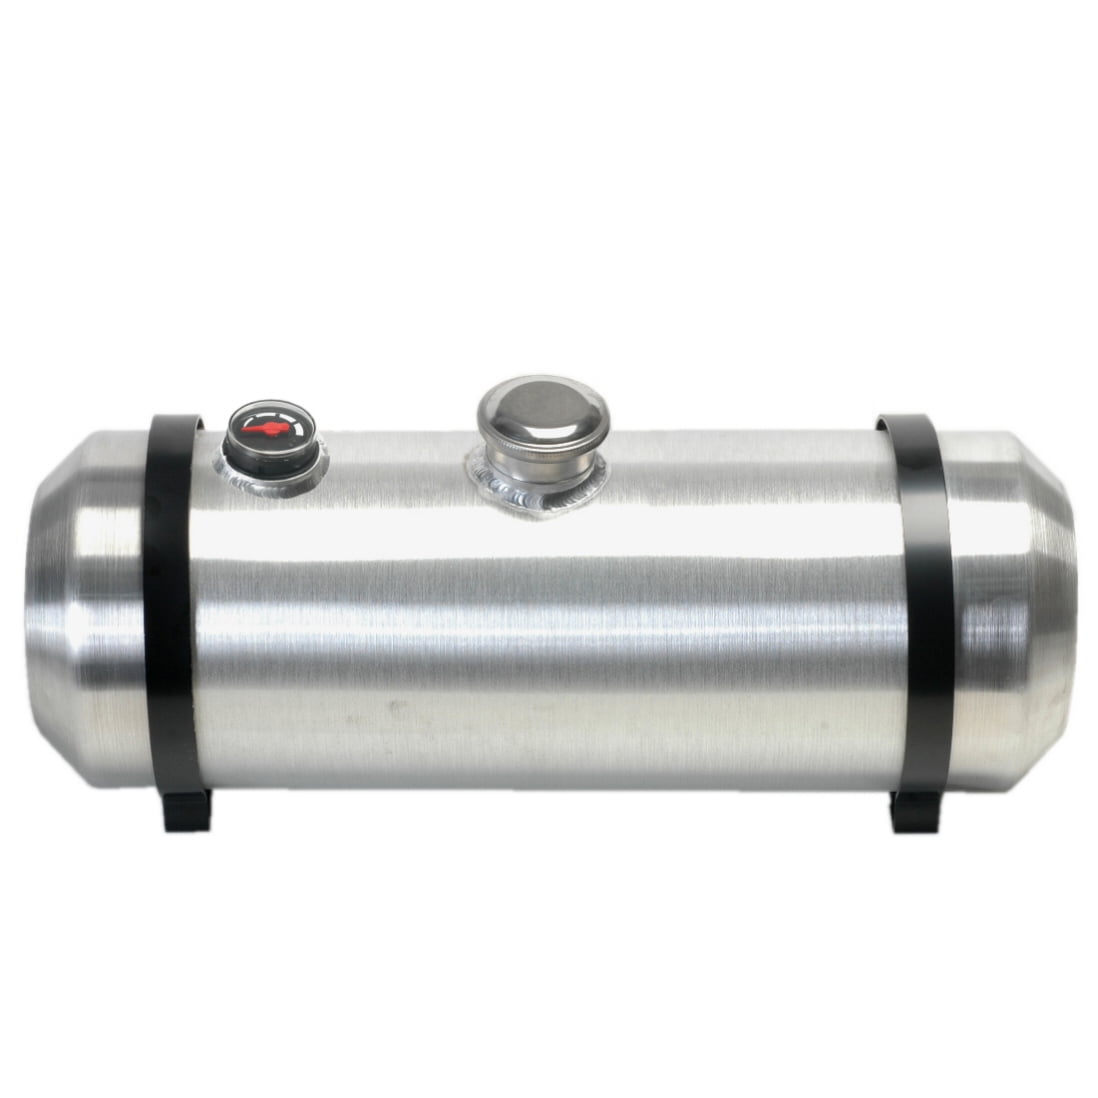 8 Inches X 36 Spun Aluminum Gas Tank 7.5 Gallons With Sight Gauge For Dune Buggy, Sandrail, Hot Rod, Rat Rod, Trike